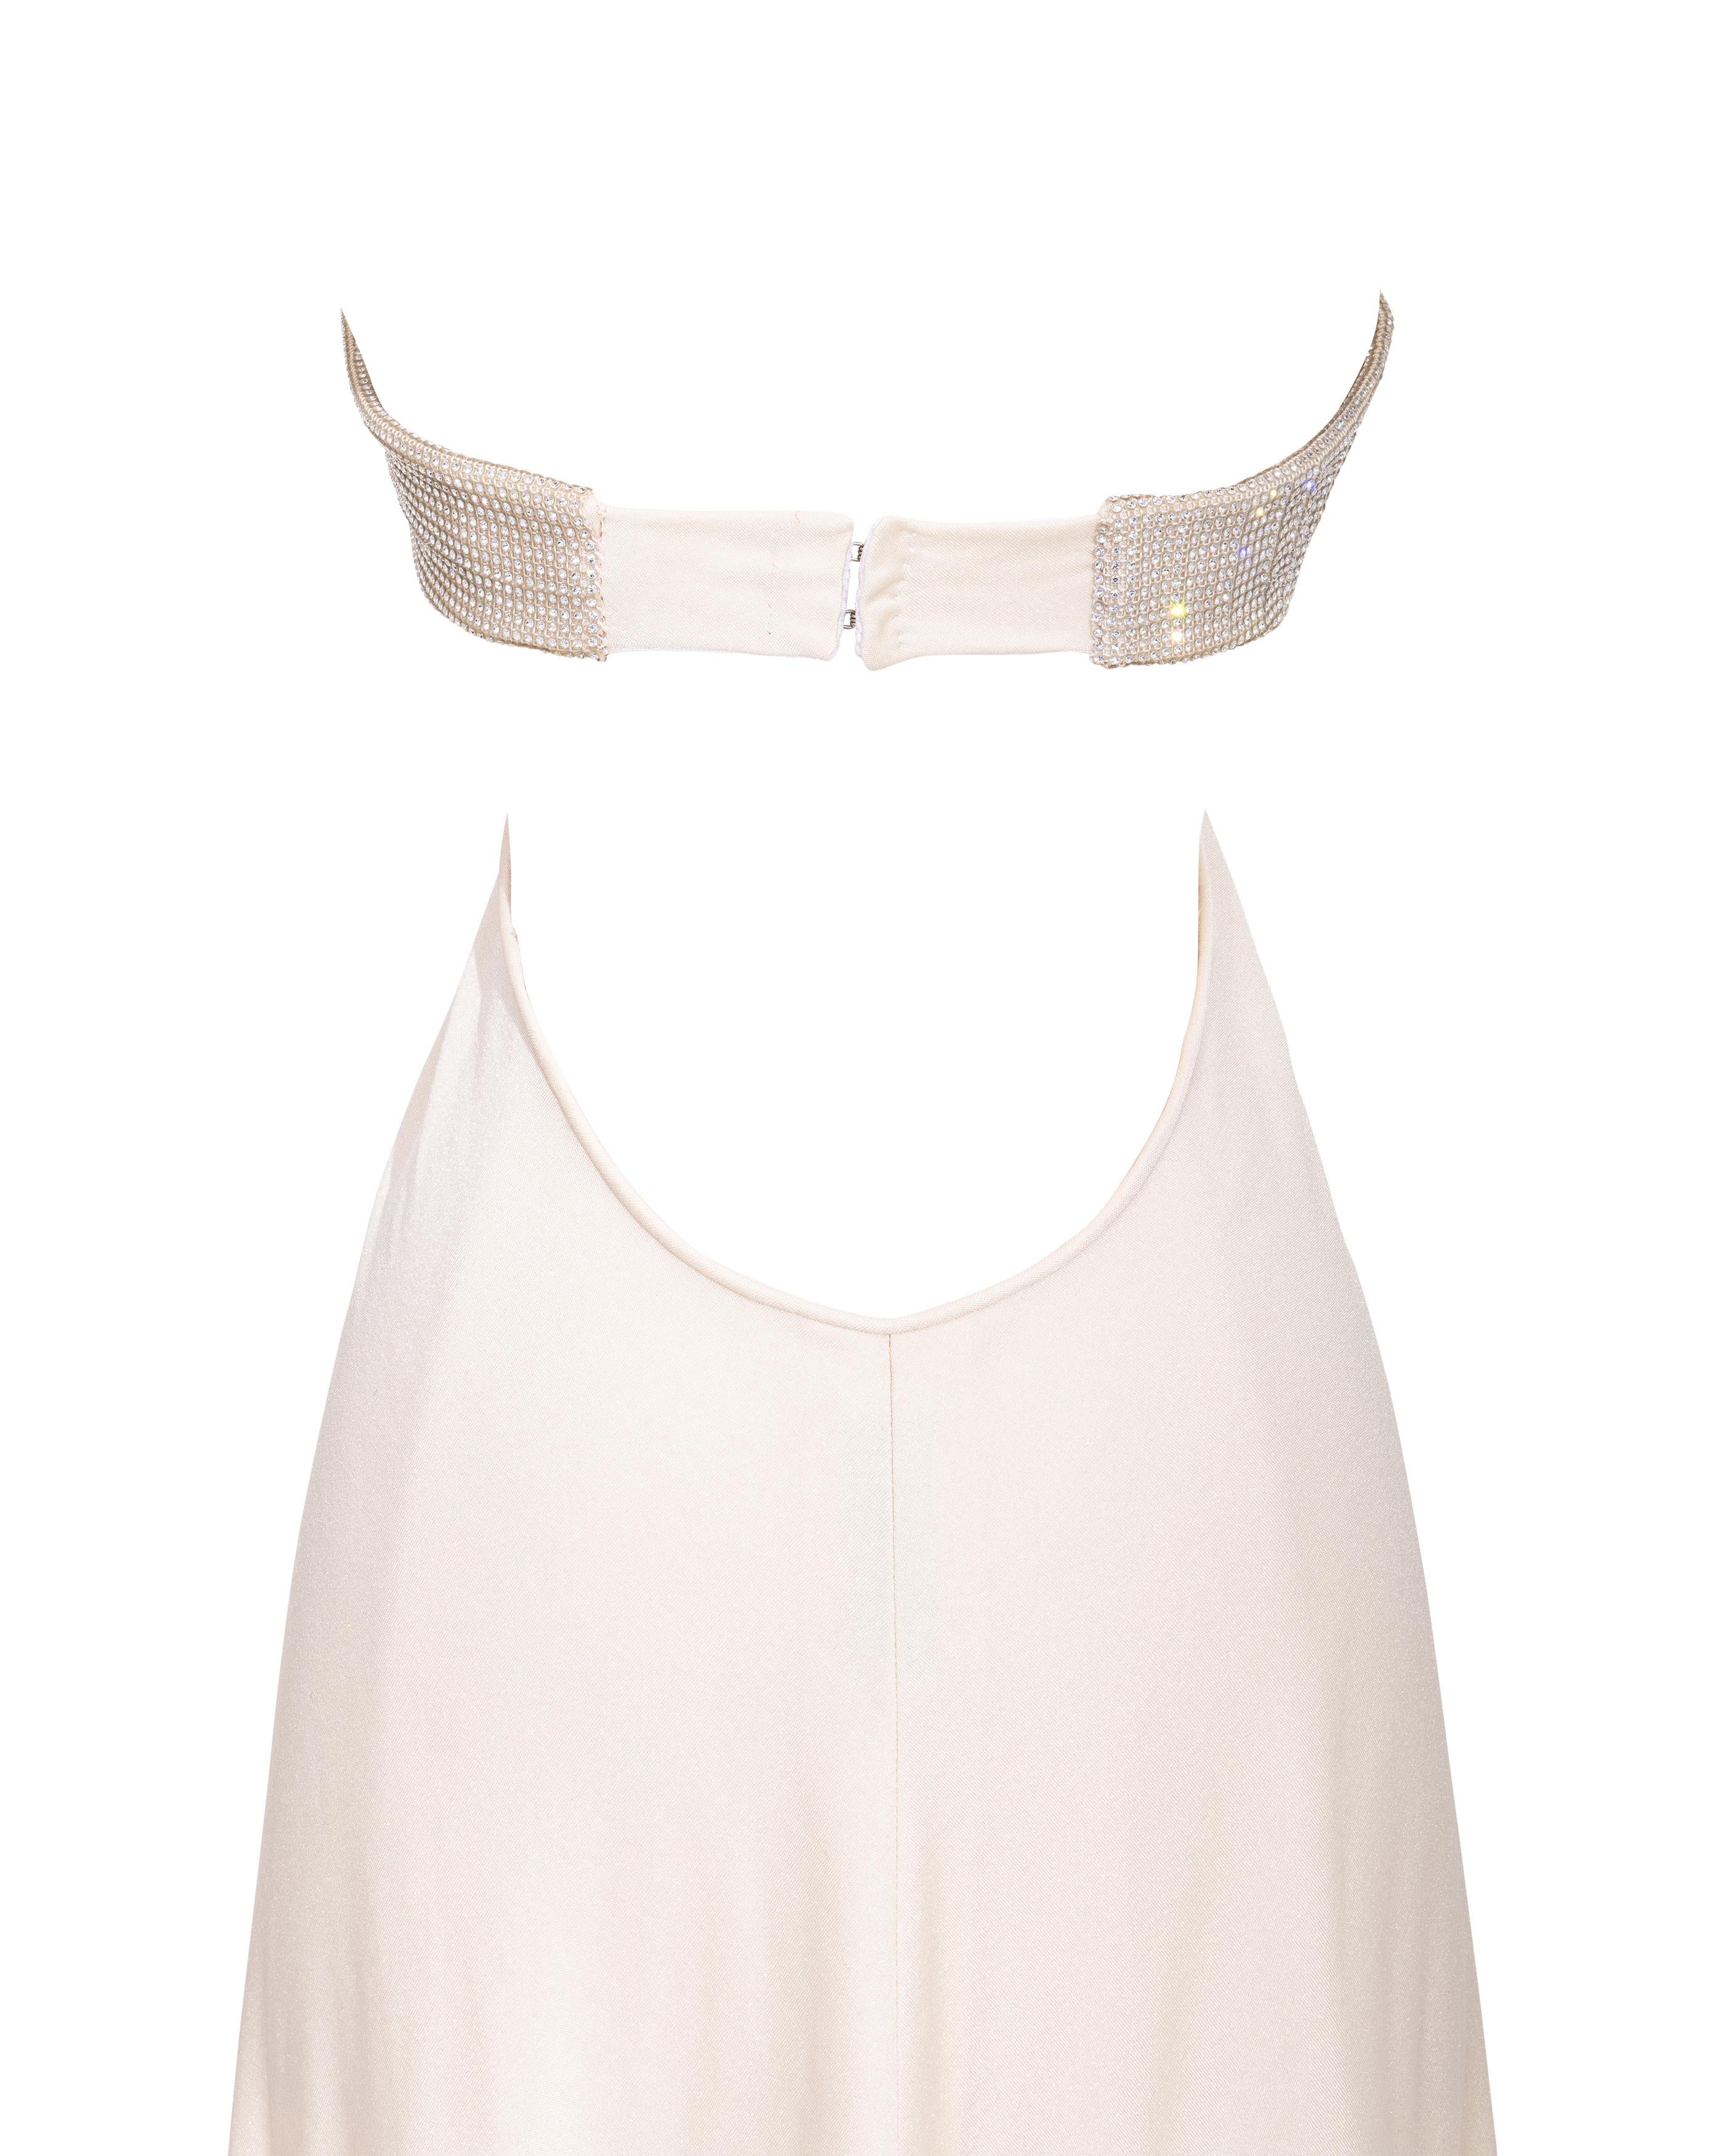 1978 Loris Azzaro White Gown with Crystal Cutout Bodice 5